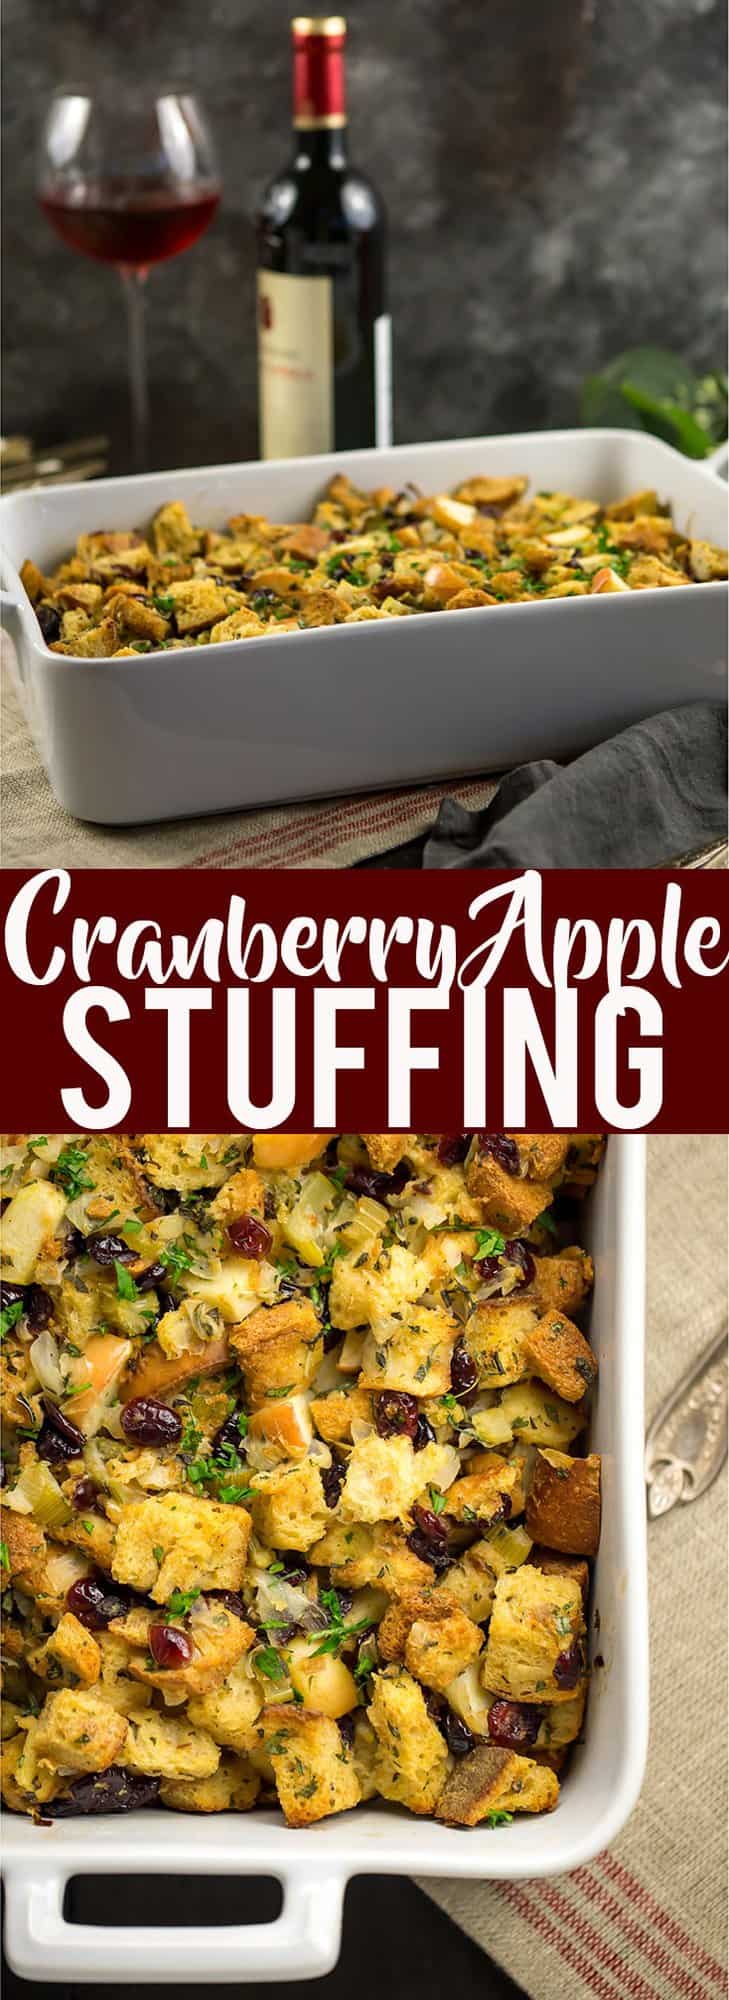 Cranberry Apple Stuffing recipe | How to make stuffing from scratch | Classic Stuffing Recipe | Traditional Stuffing Recipe | Simple Stuffing Recipe | Thanksgiving Dressing Recipe | Classic Bread Stuffing Recipe | Old Fashioned Stuffing Recipe | Homemade Stuffing Recipe | Herb Stuffing Recipe | Best Ever Stuffing Recipe | Moist Stuffing Recipe #thanksgivingrecipe #stuffingrecipe #traditionalstuffingrecipe #oldfashionedstuffingrecipe